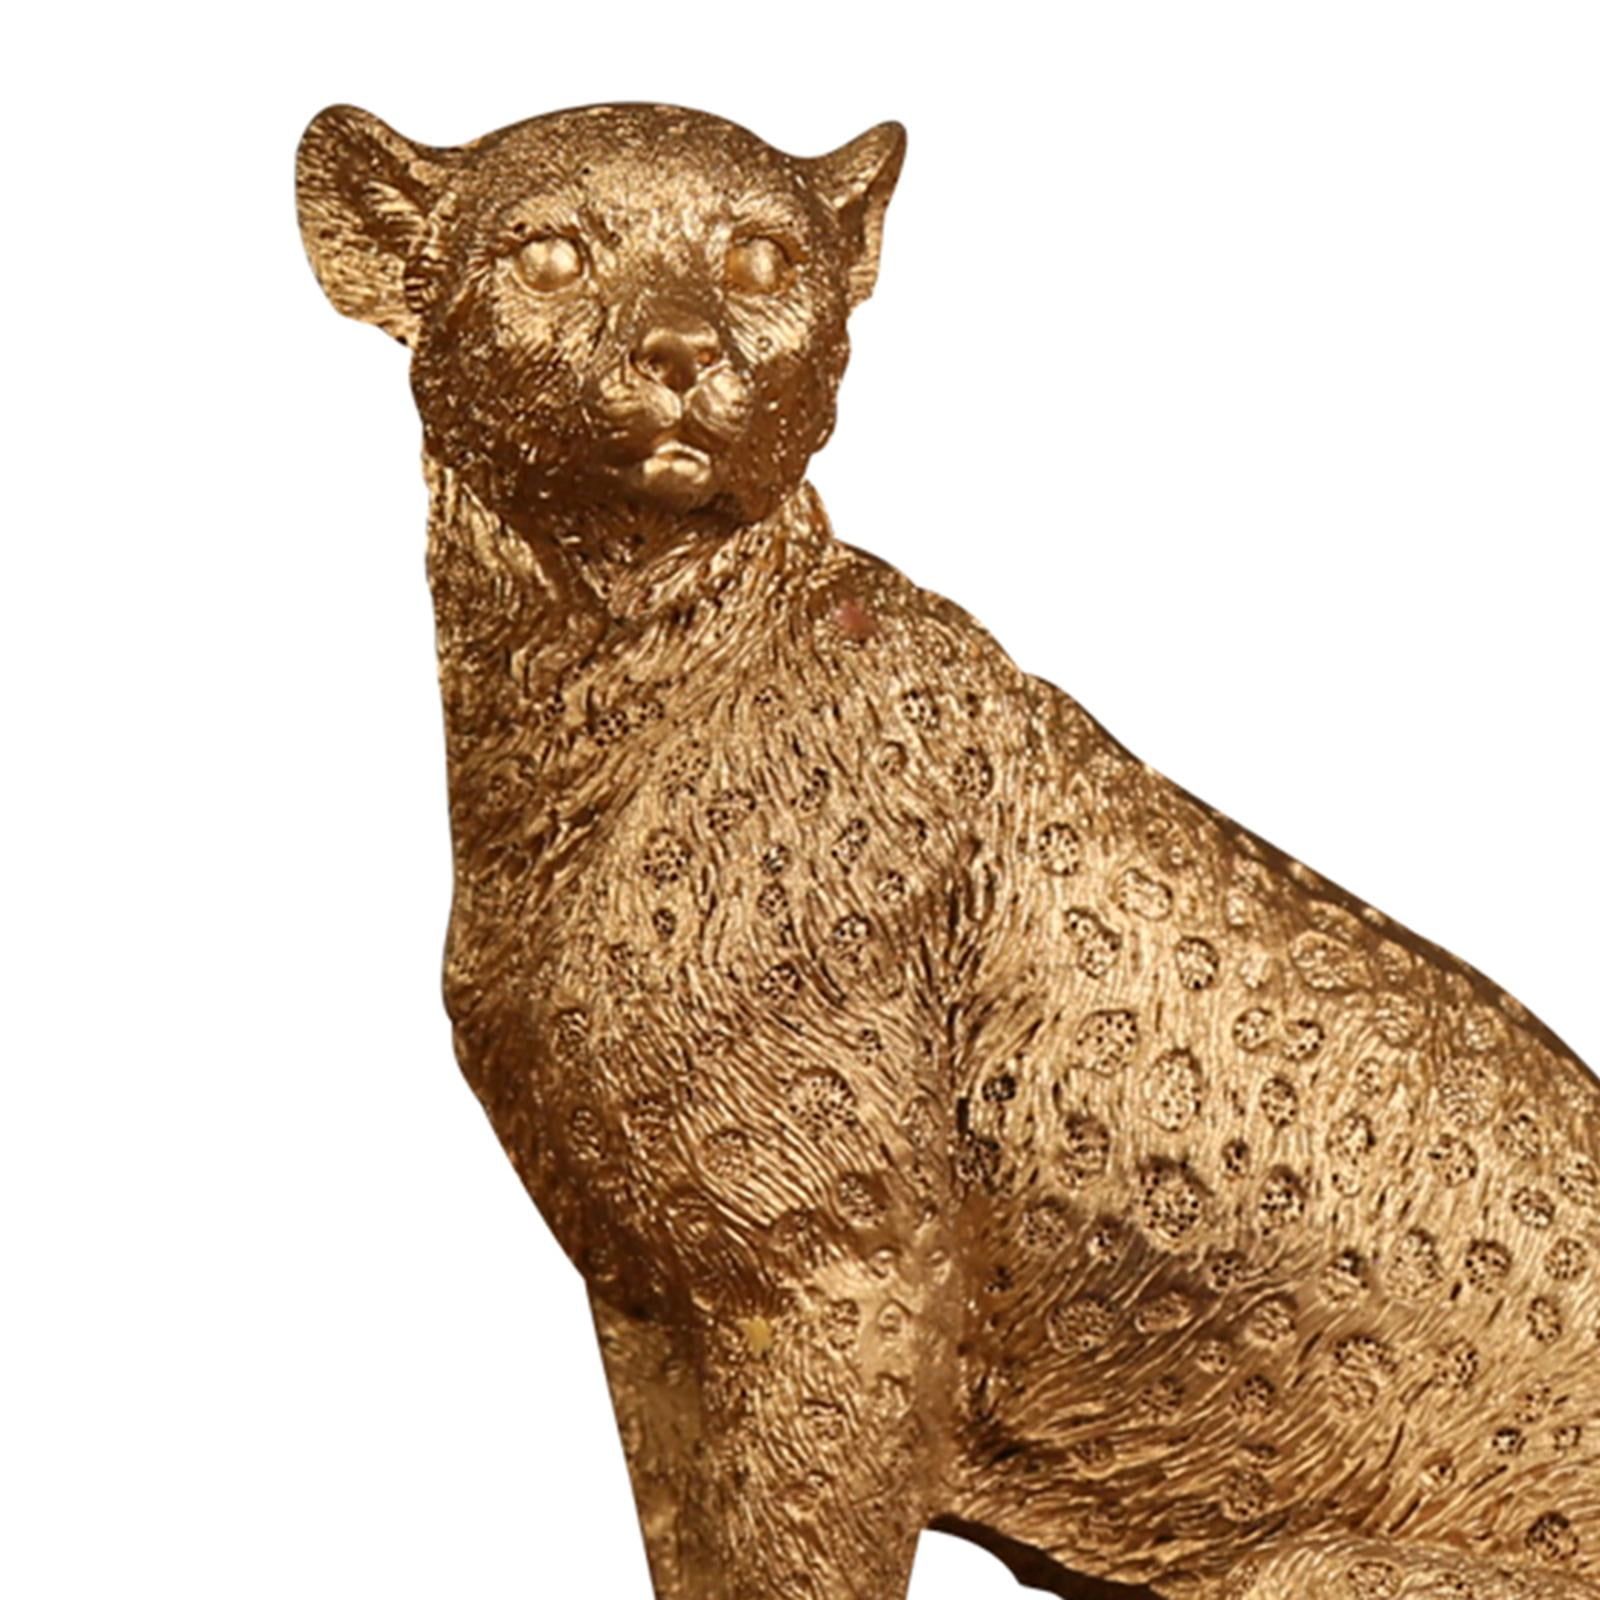 Leopard Statue Cheetah Figurine Brass at Rs 3799, Sector 36